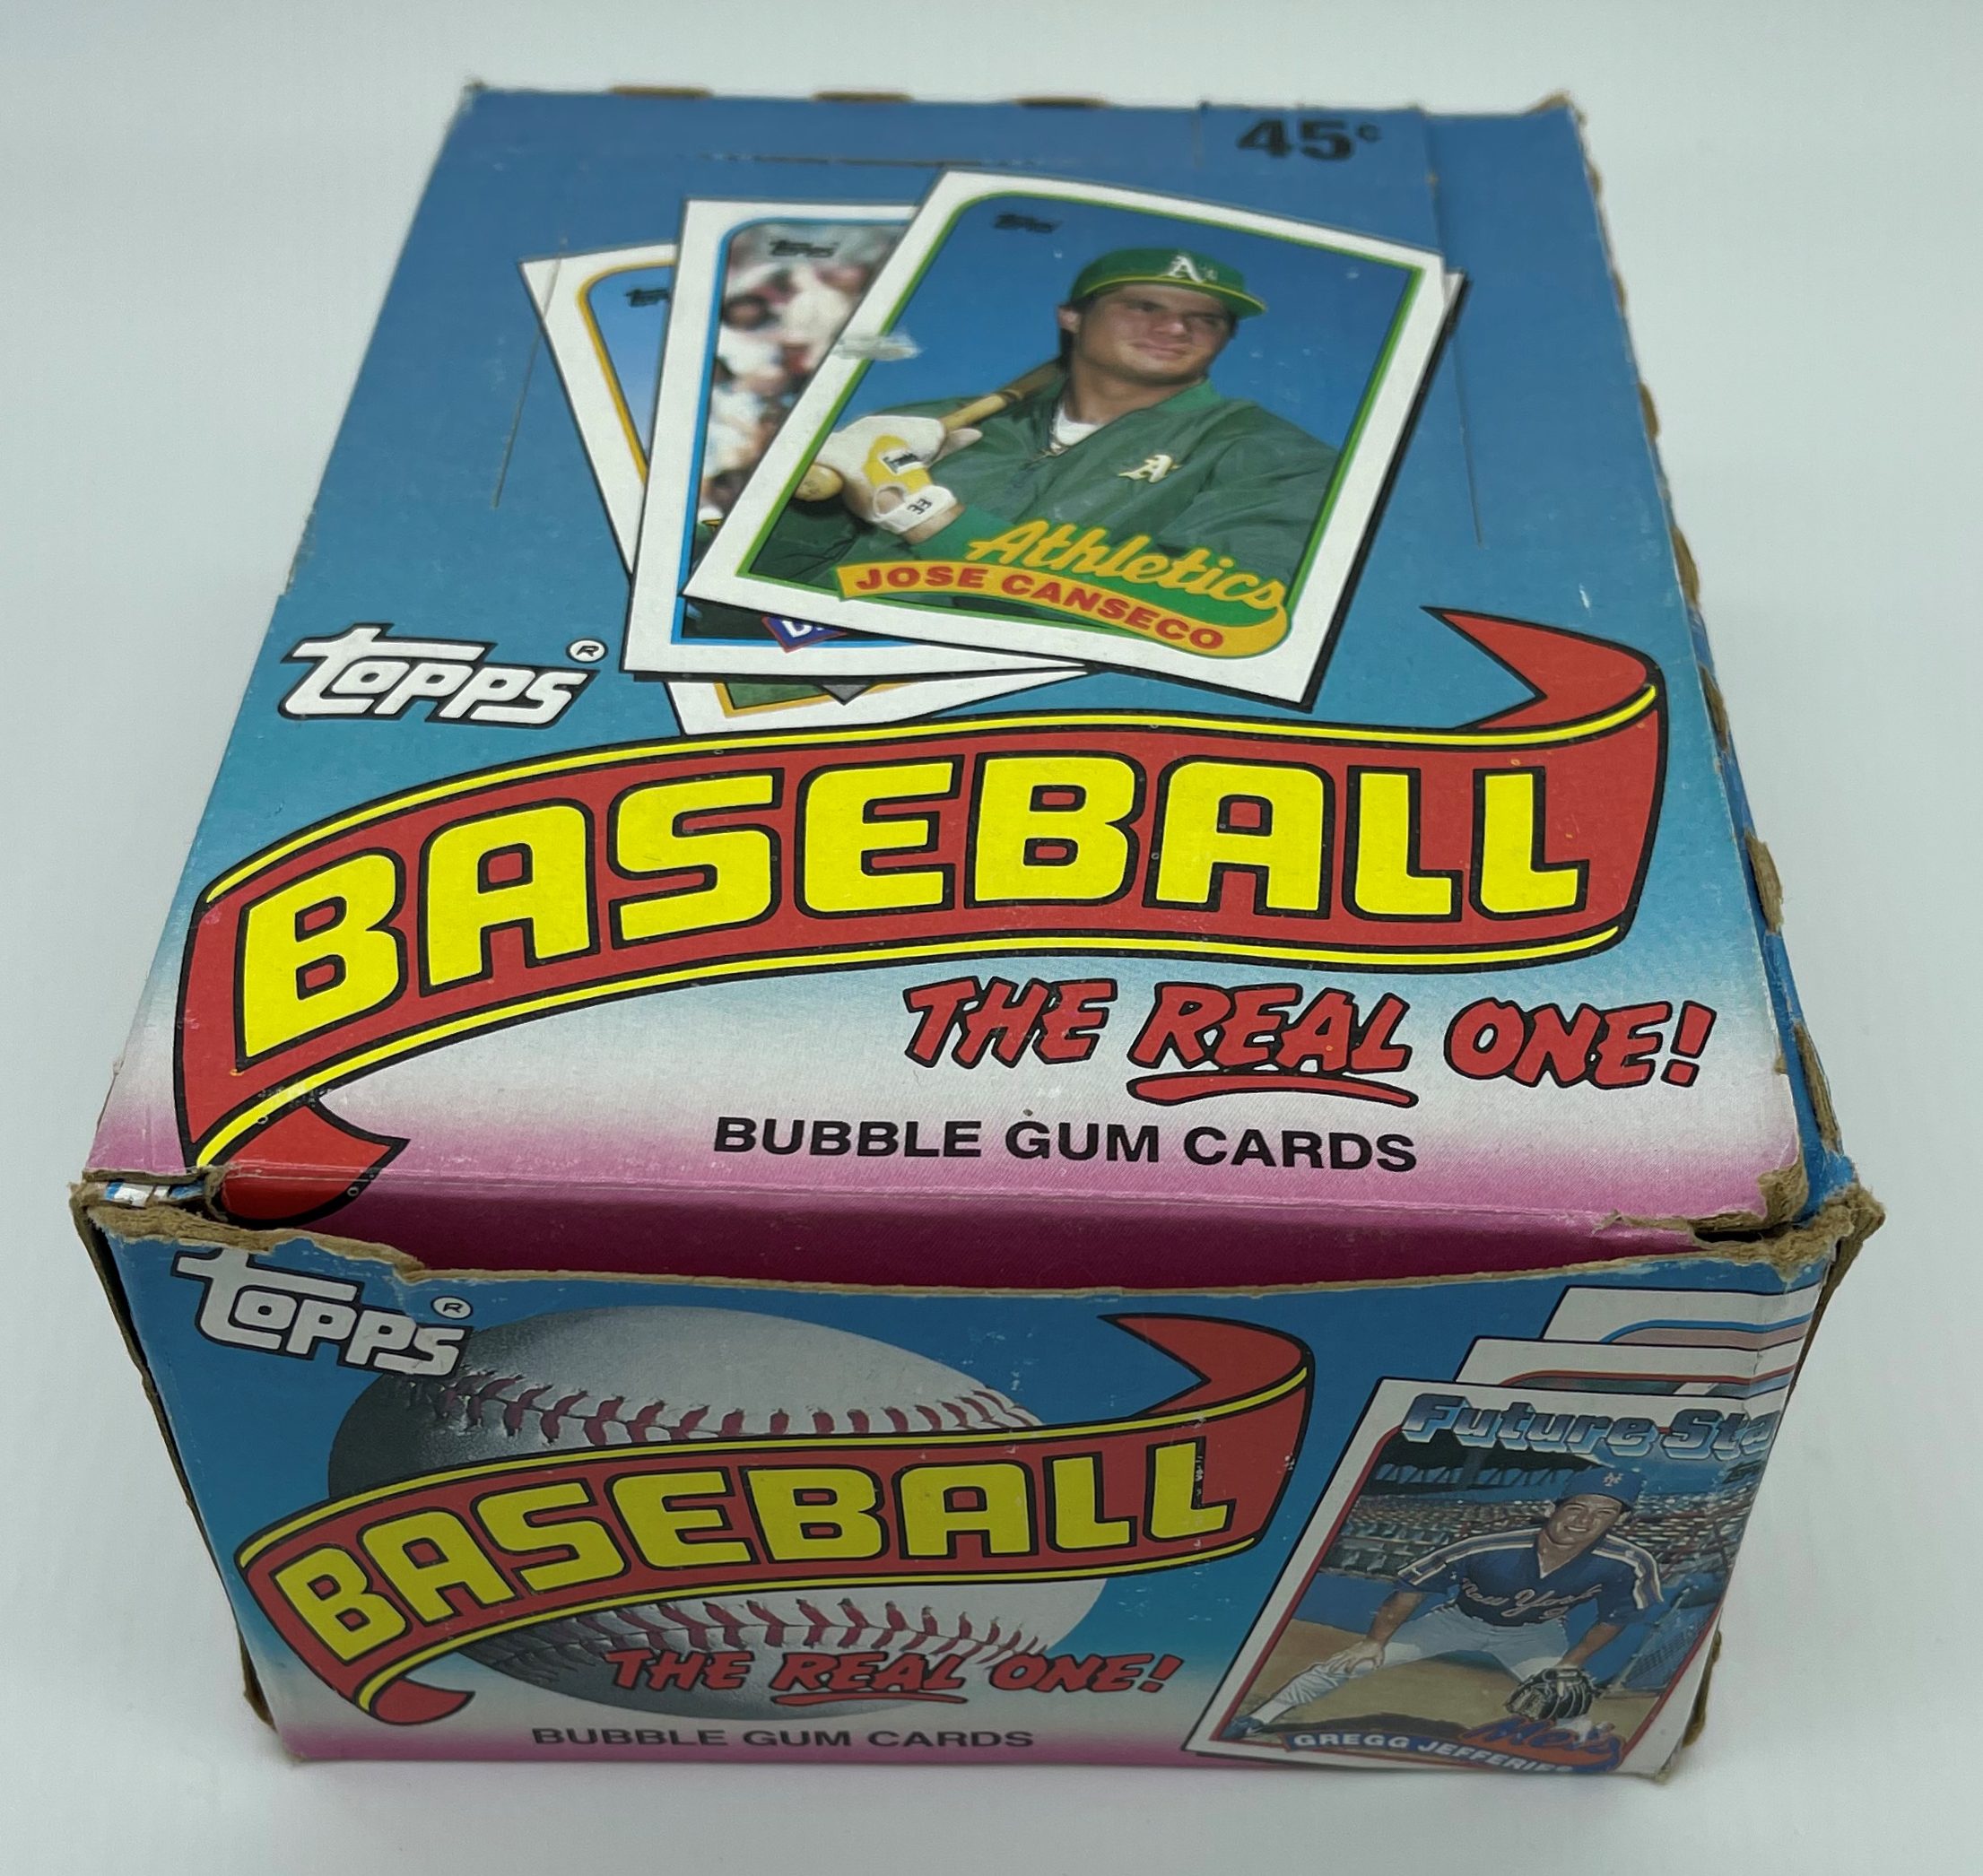 1989 Topps Baseball Card Box | Froggers House of Cards